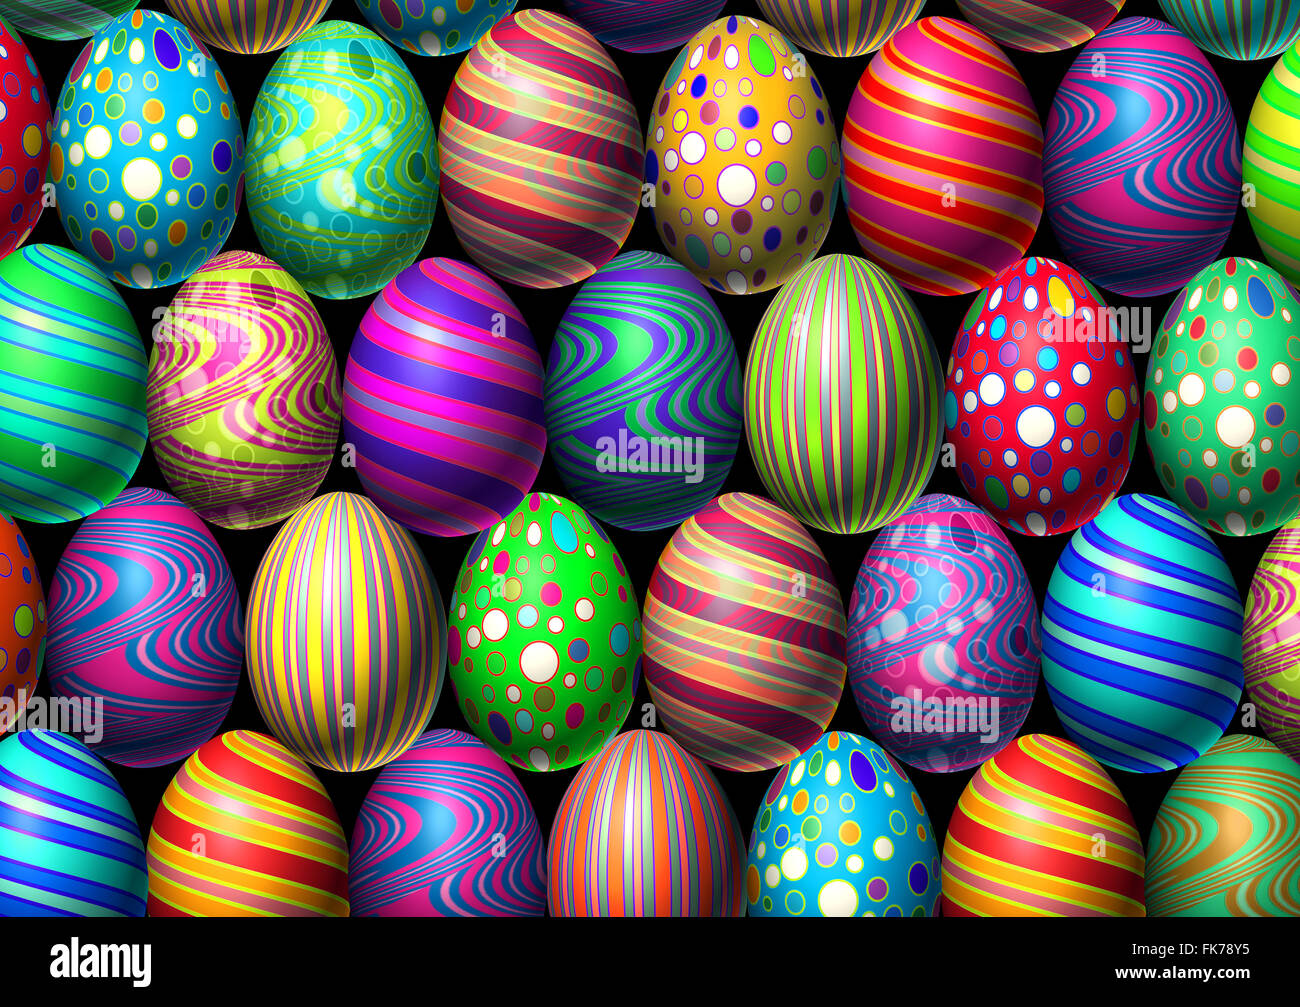 Easter egg background holiday eggs decoration with multi colored festive spring ovals in a celebration of traditional cultural easter egg hunt. Stock Photo